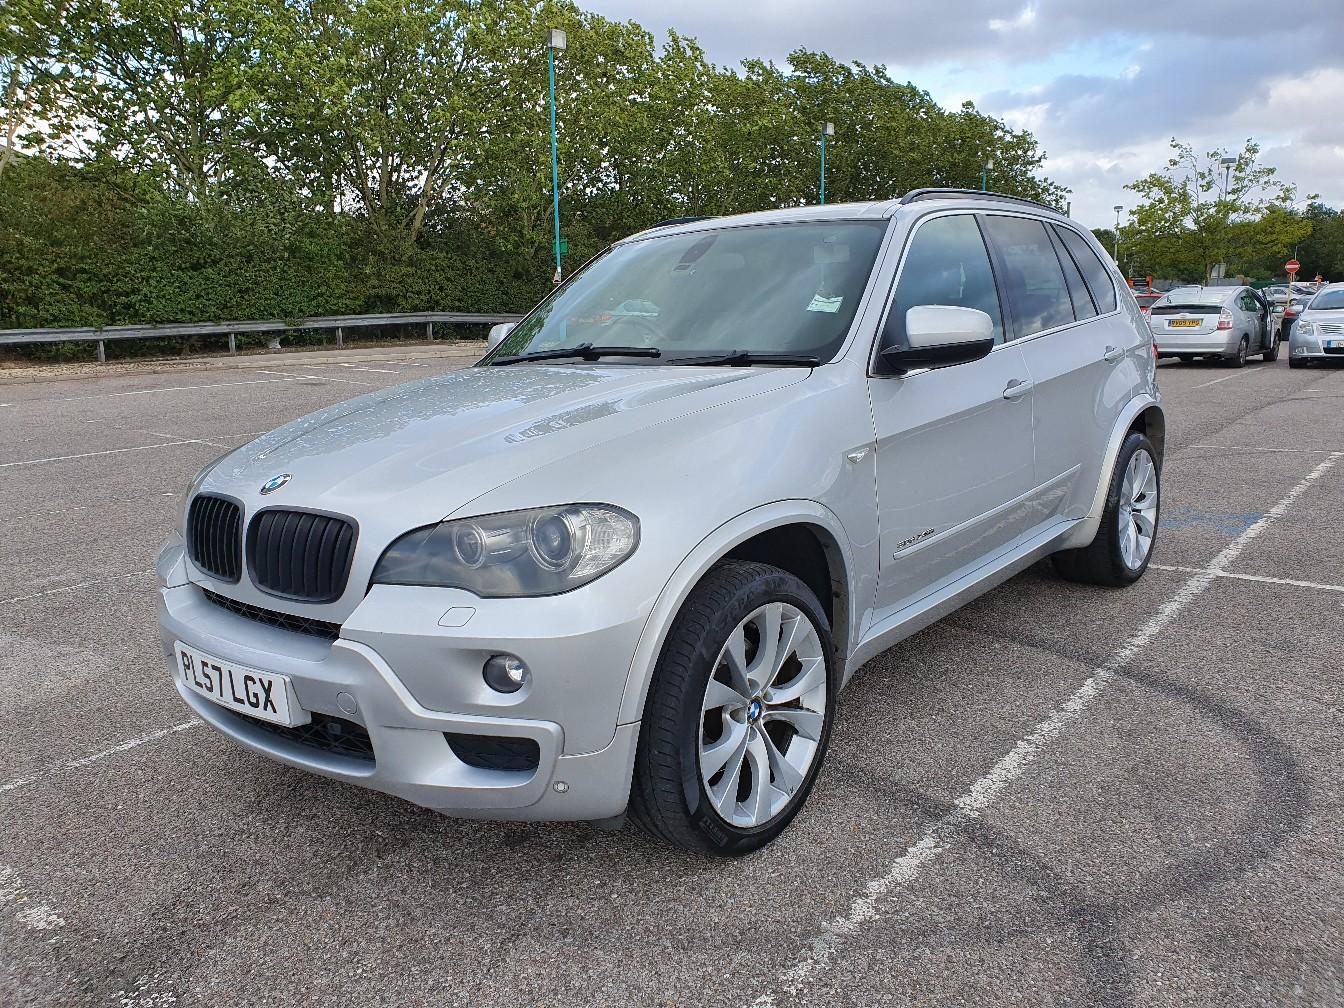 BMW X5 M Sport 7 Seater 78k Mileage in W2 Westminster for £7,000.00 for